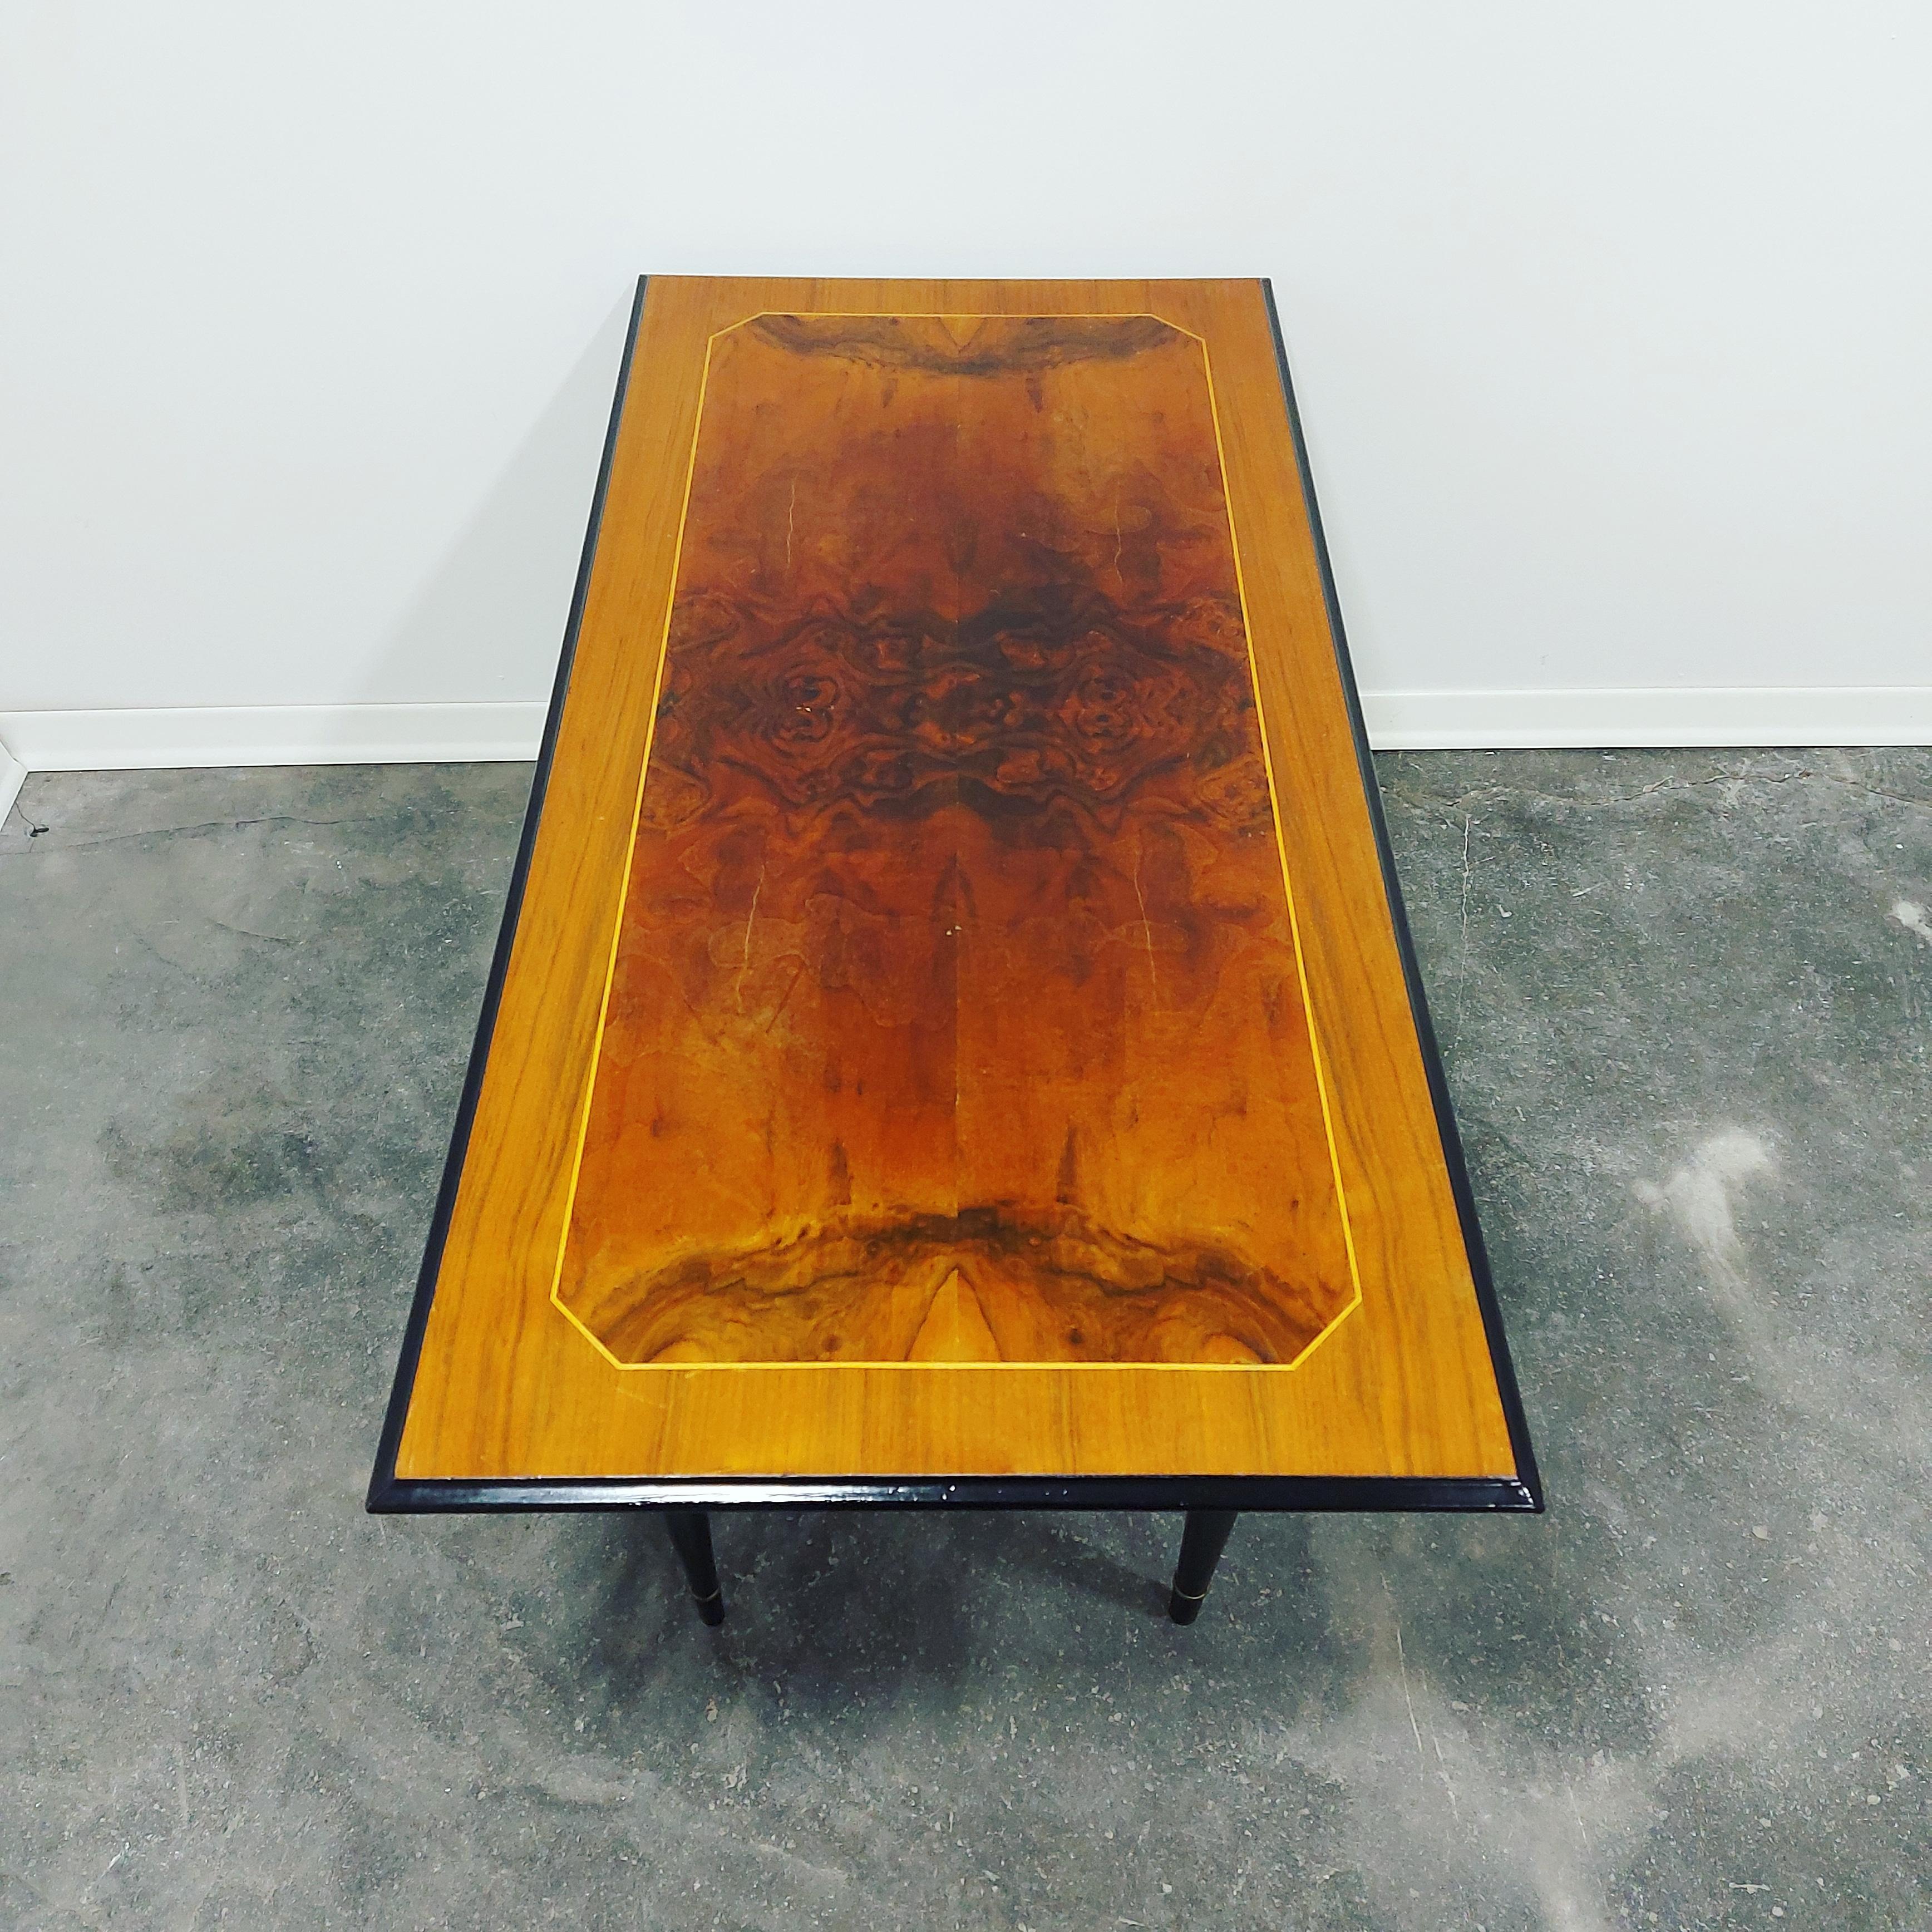 Beautiful Table 1960s.

Nice patina and refreshed with complete care for the maker.